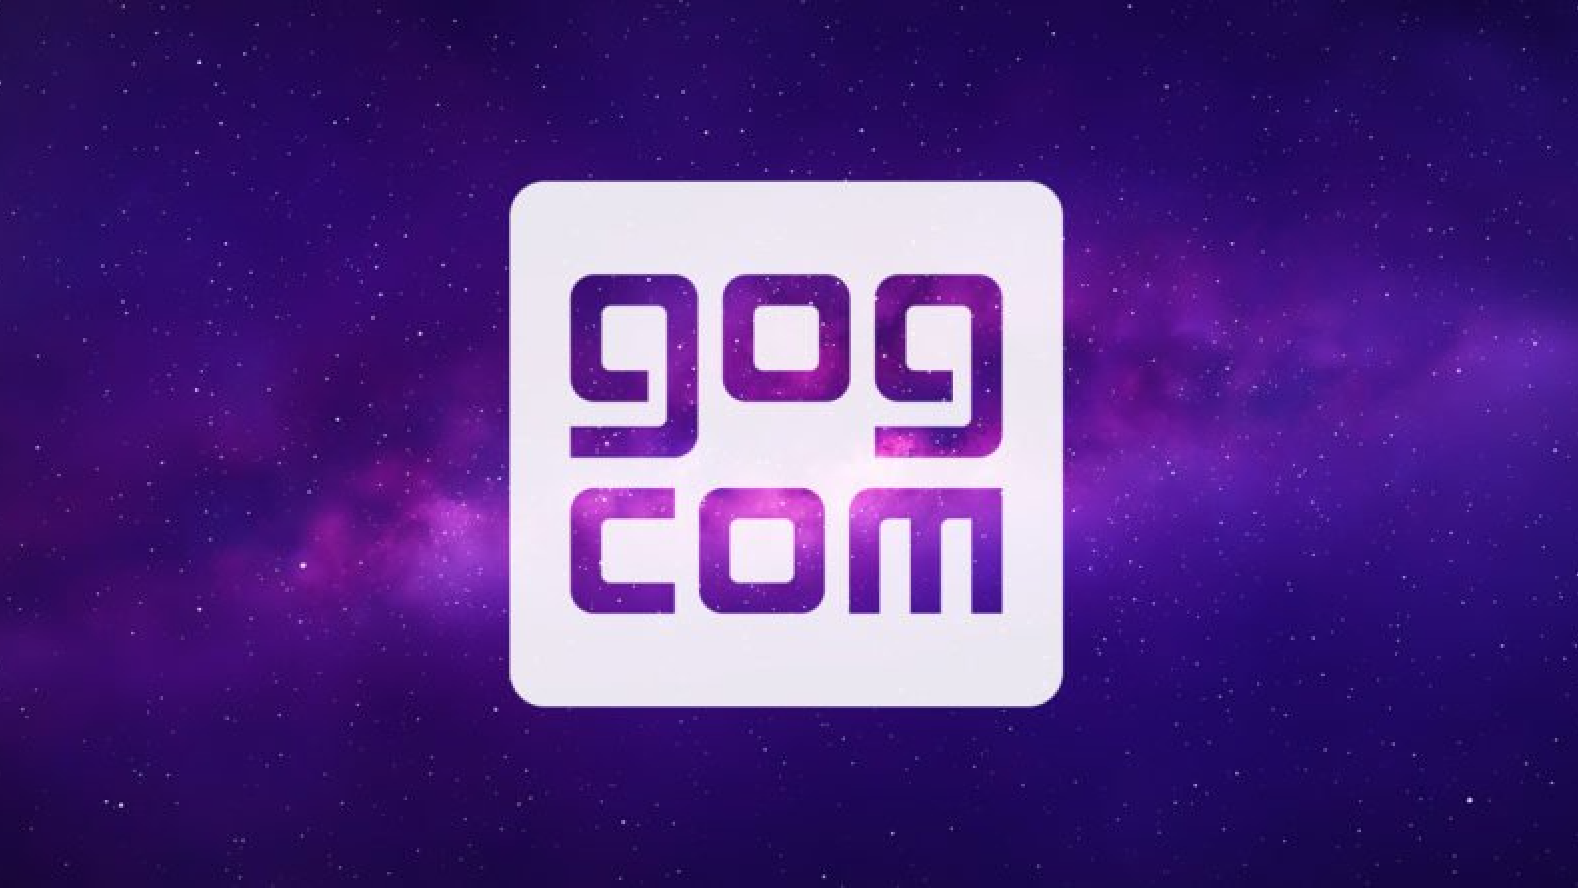 Art of the GOG logo on a space background